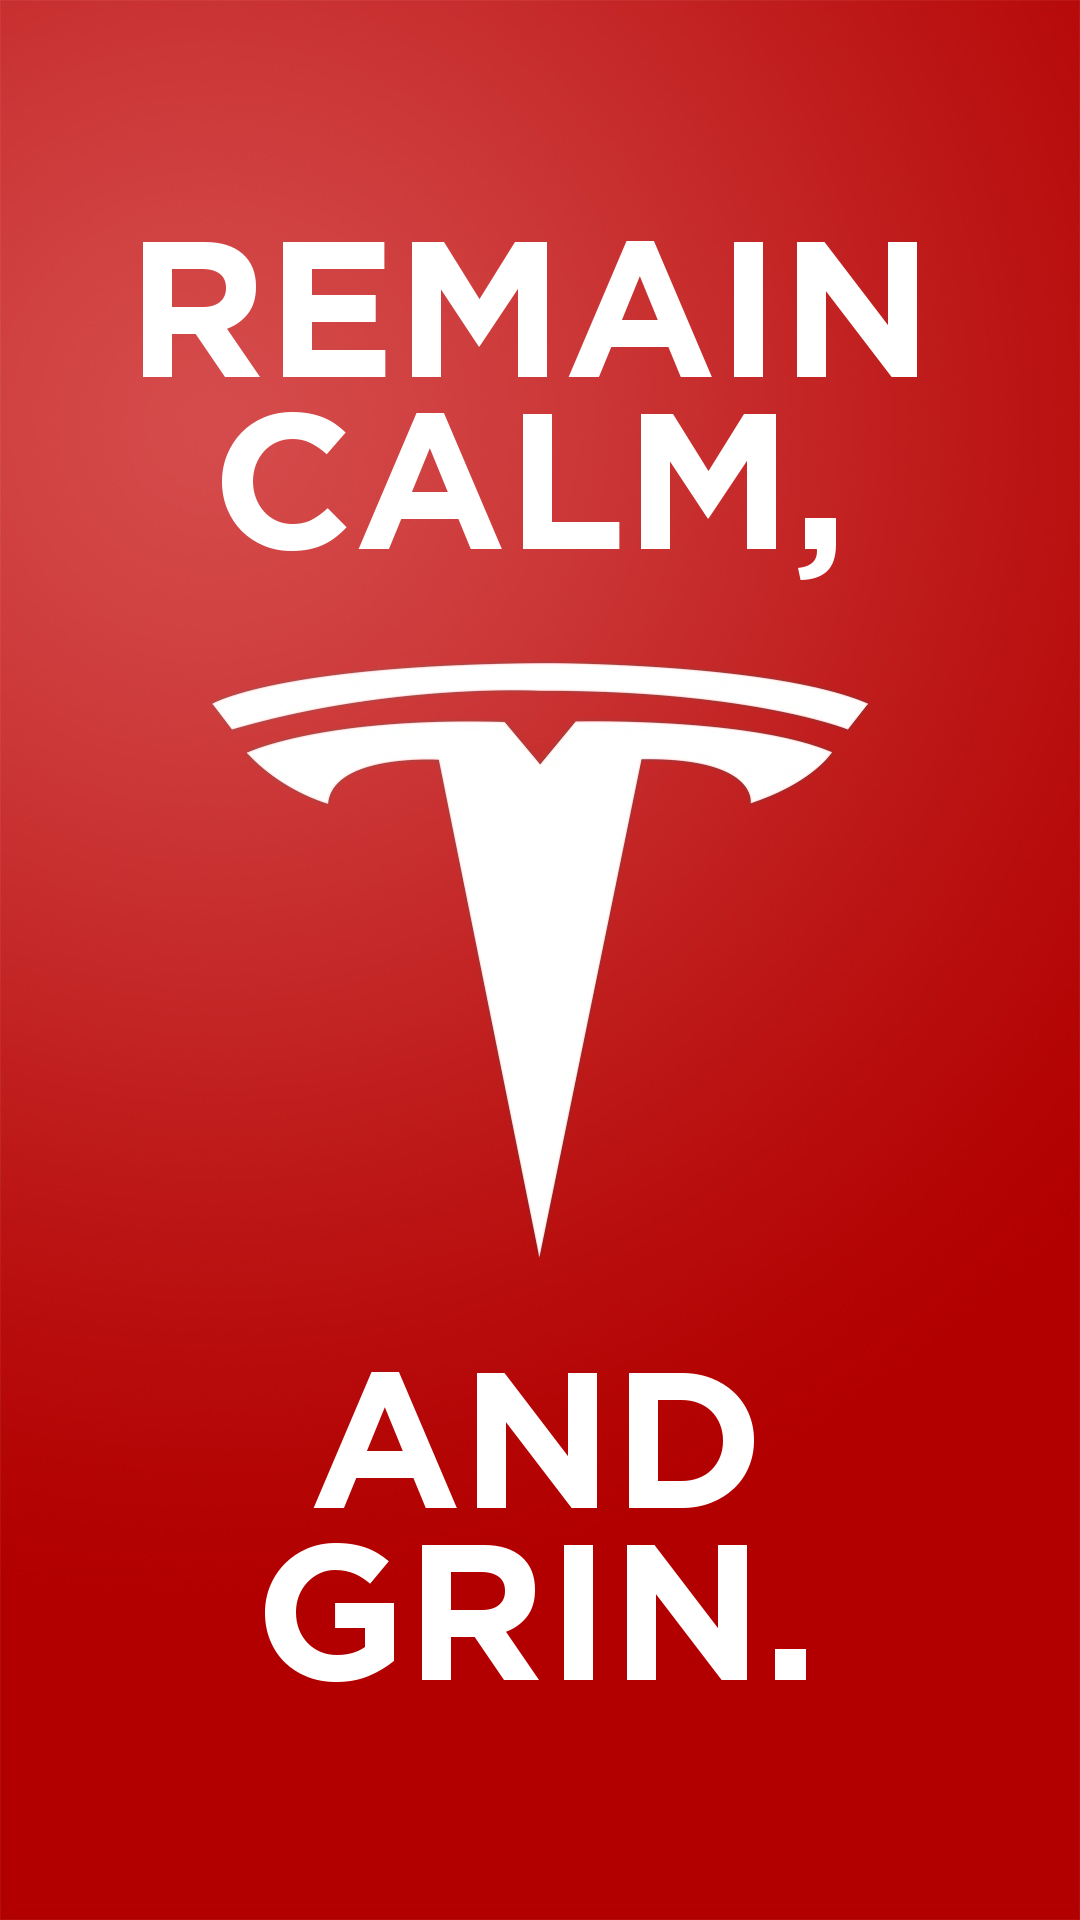 AD_-_Tesla Motors - Remain Calm and Grin Spike Logo.png